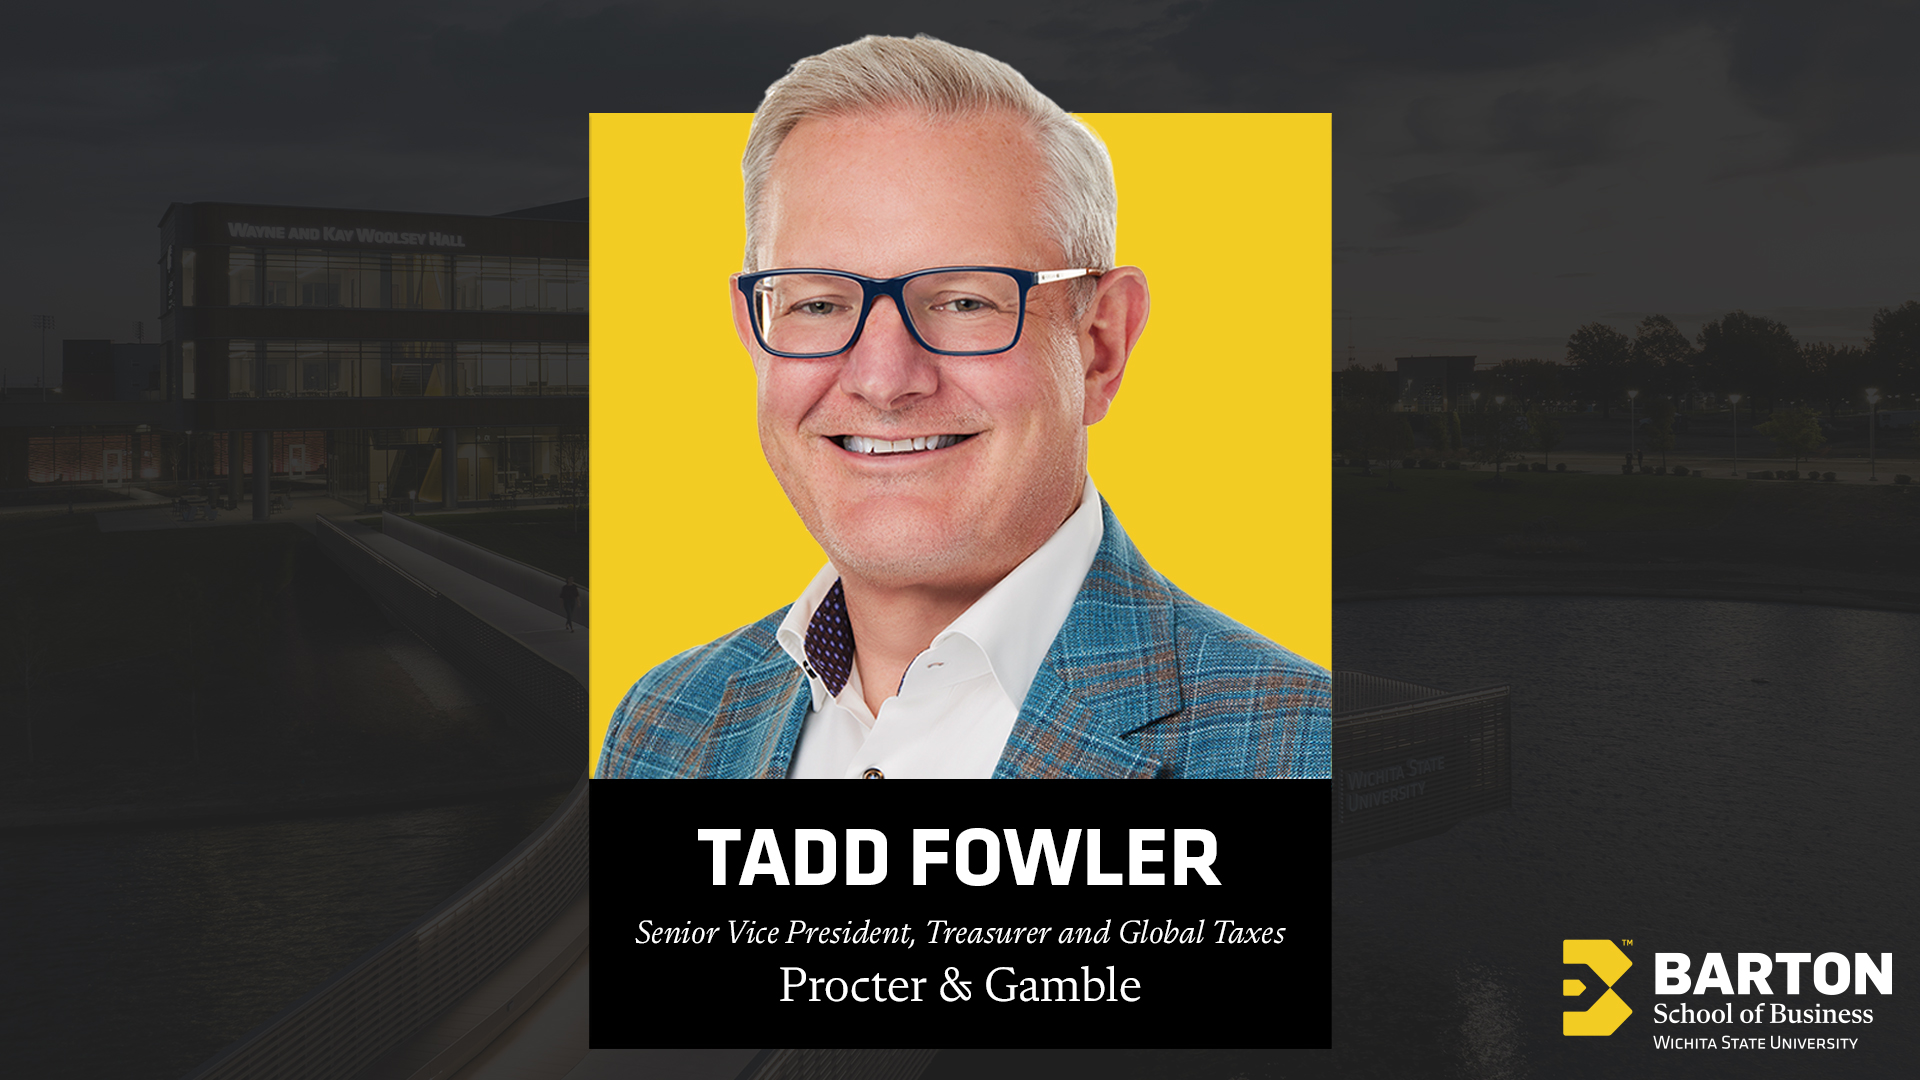 Tadd Fowler, Senior Vice President, Treasurer and Global Taxes at The Procter & Gamble Company